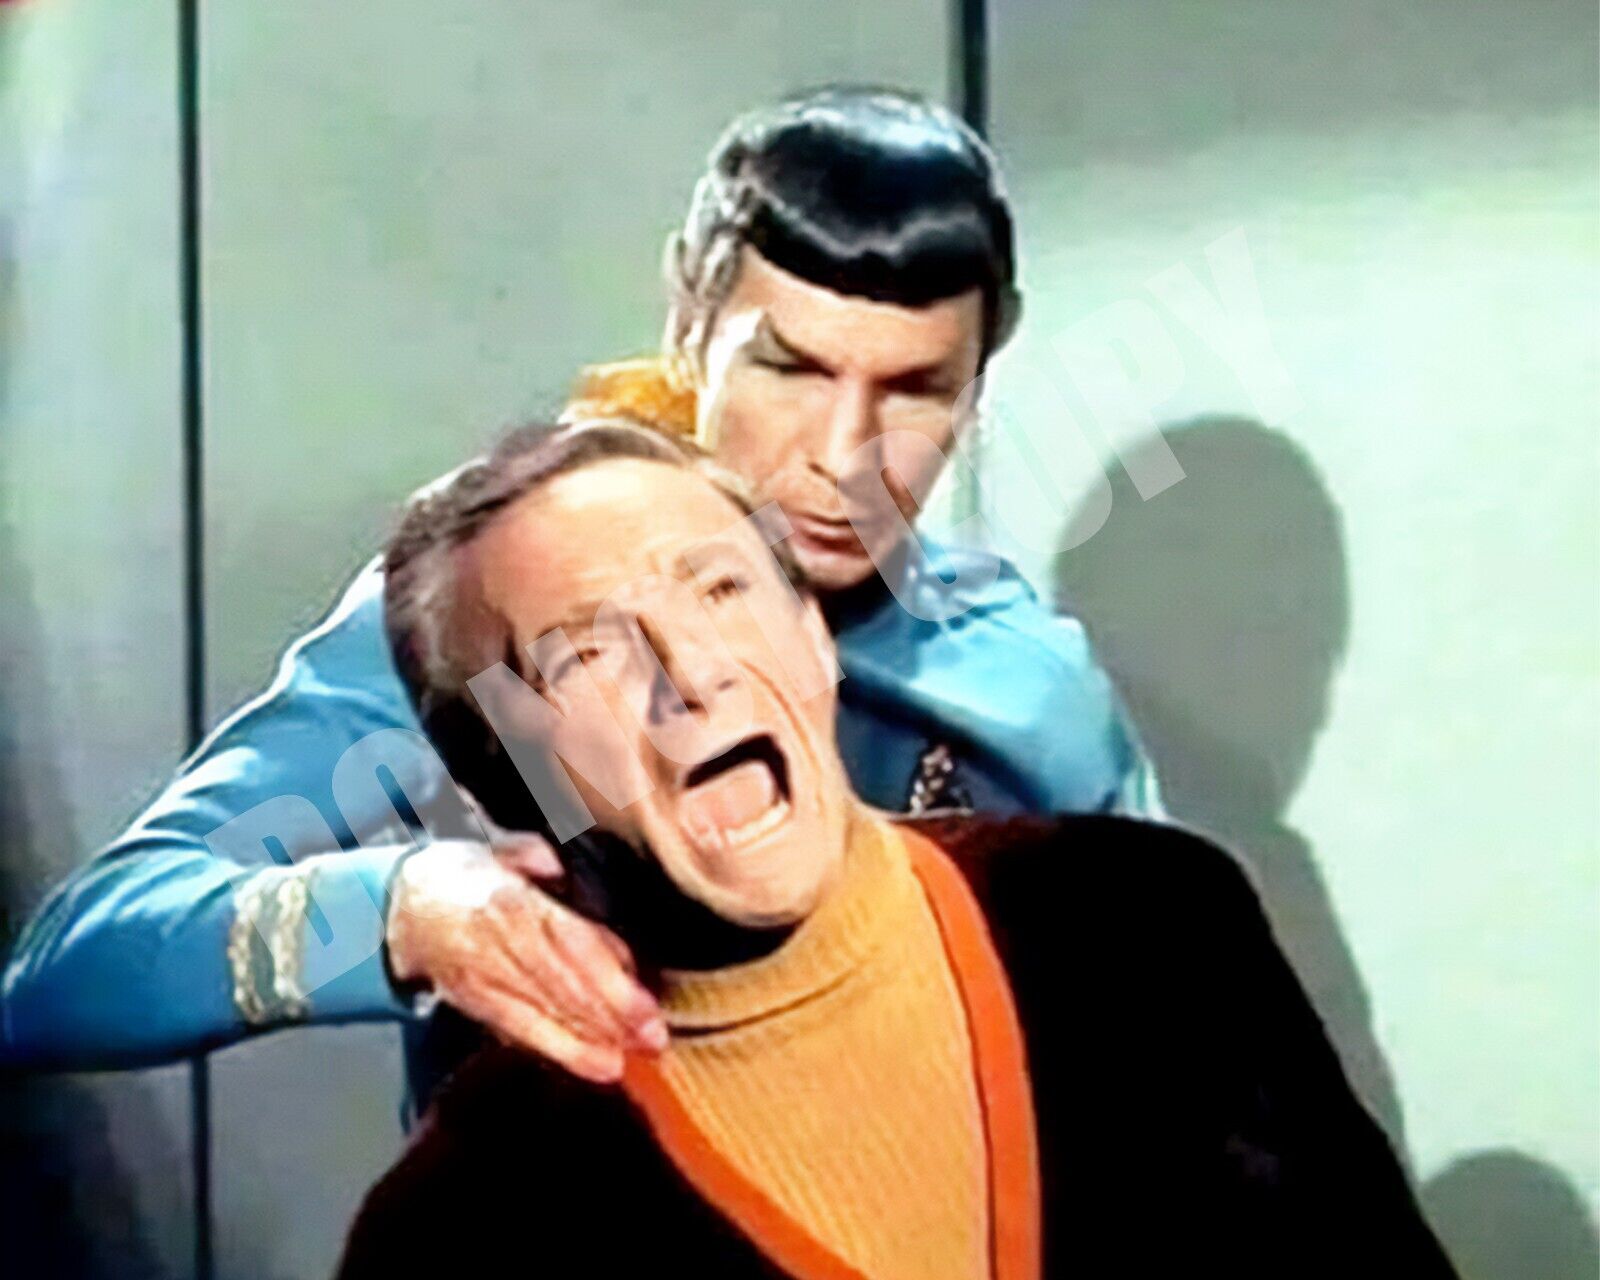 Star Trek Spock Giving Vulkan Death Grip To Lost In Space Dr Smith 8x10 Photo